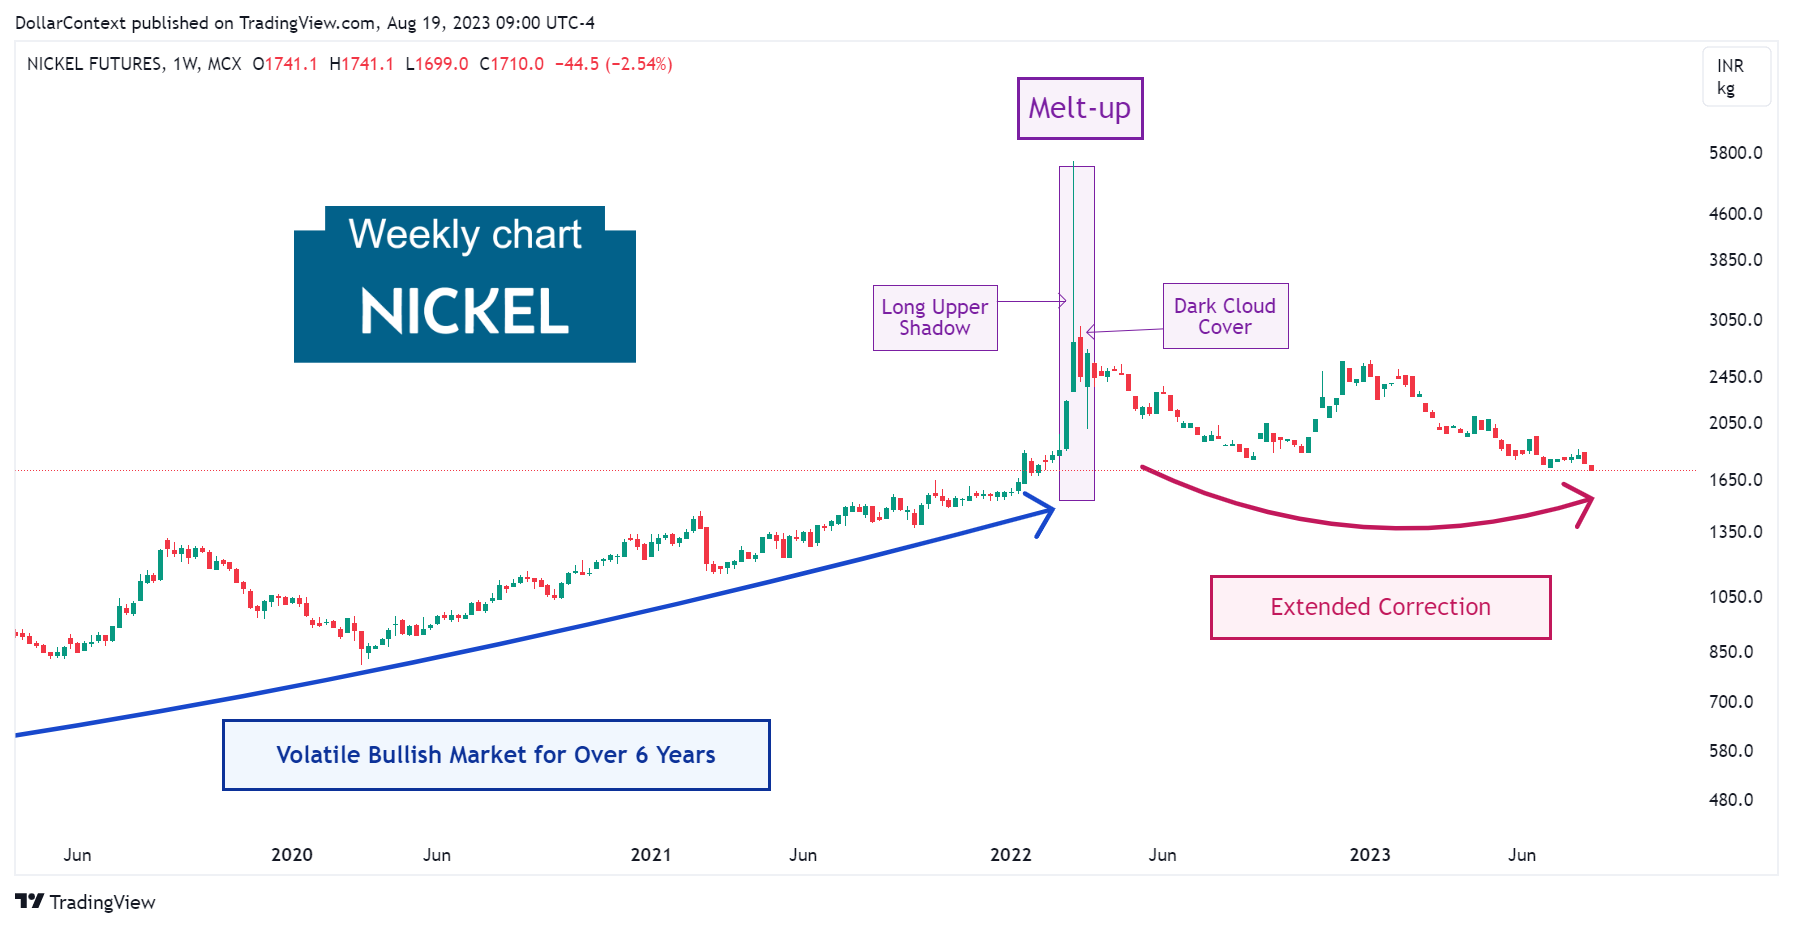 Nickel Futures: Extended Correction in 2022 and 2023 (Weekly Chart)